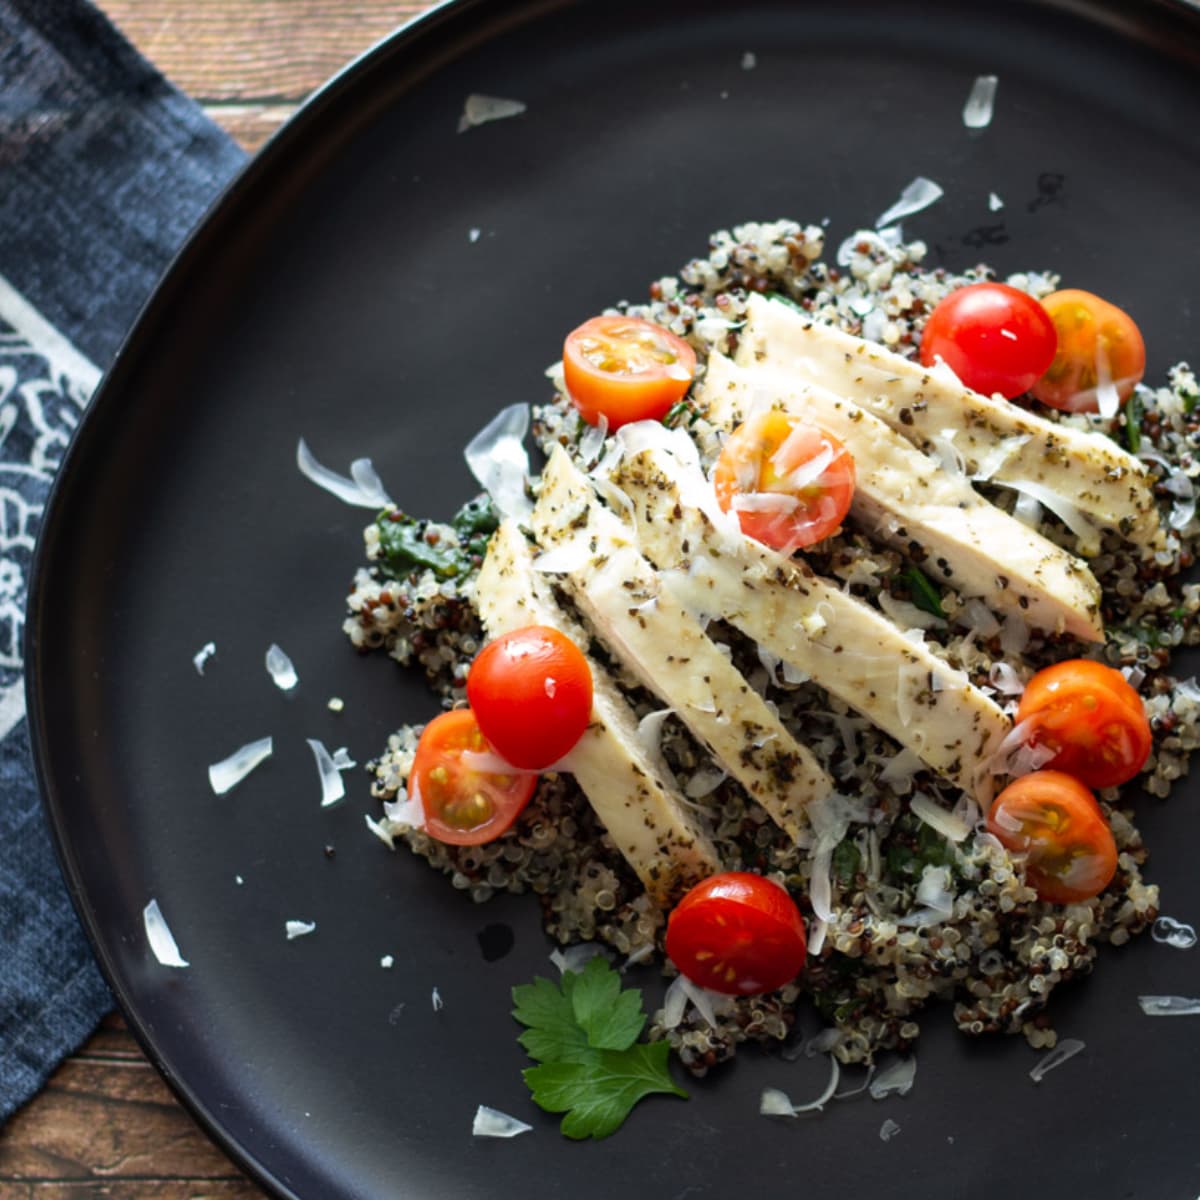 Sliced chicken and cherry tomatoes over quinoa.